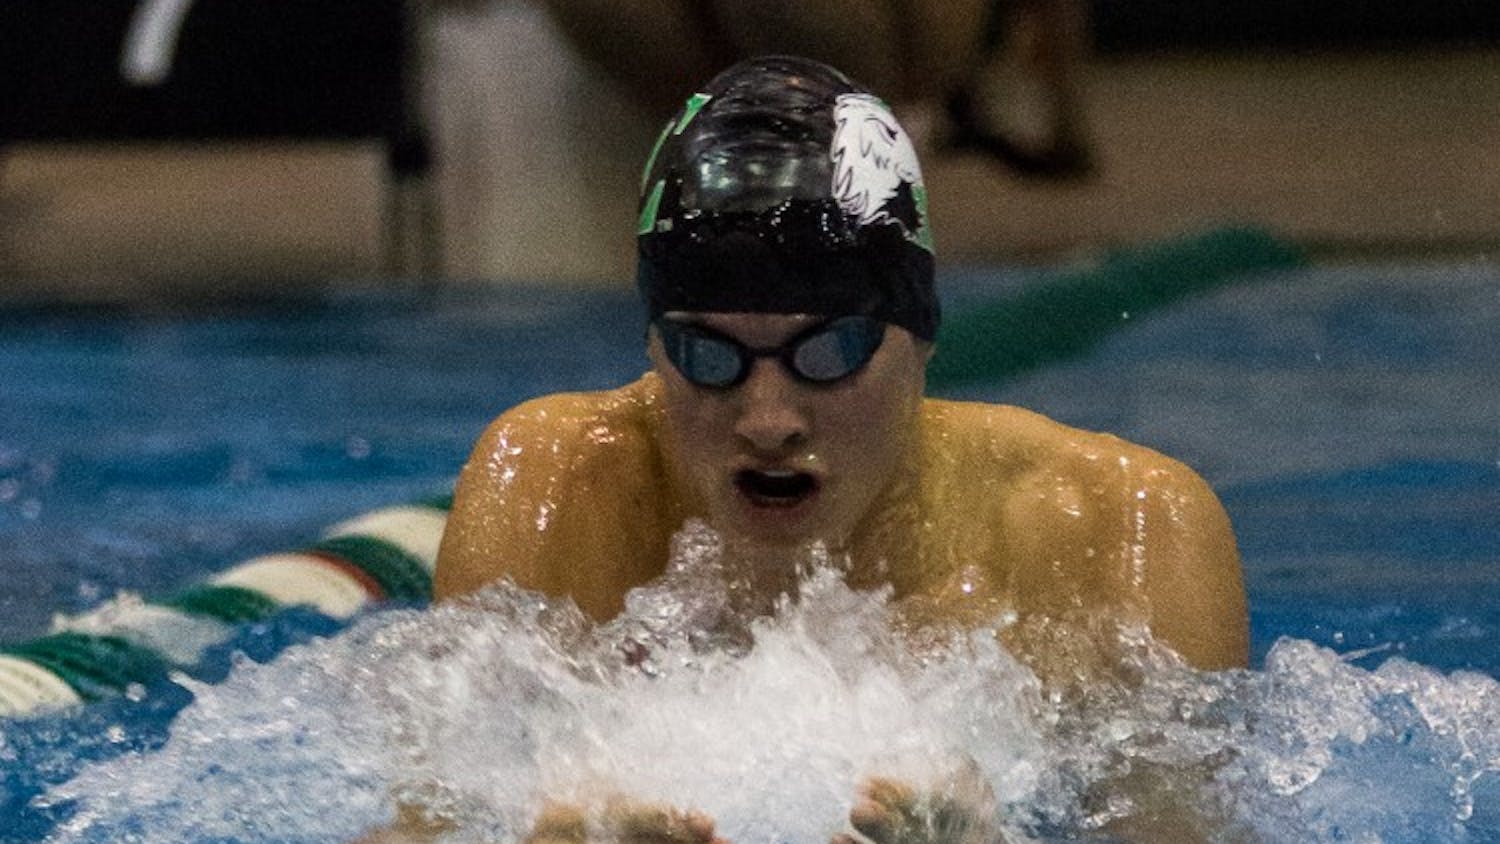 Junior Mike Fisher (Saline, MI) won the 200 yard breaststroke (2:04.75) by 1.5 seconds.